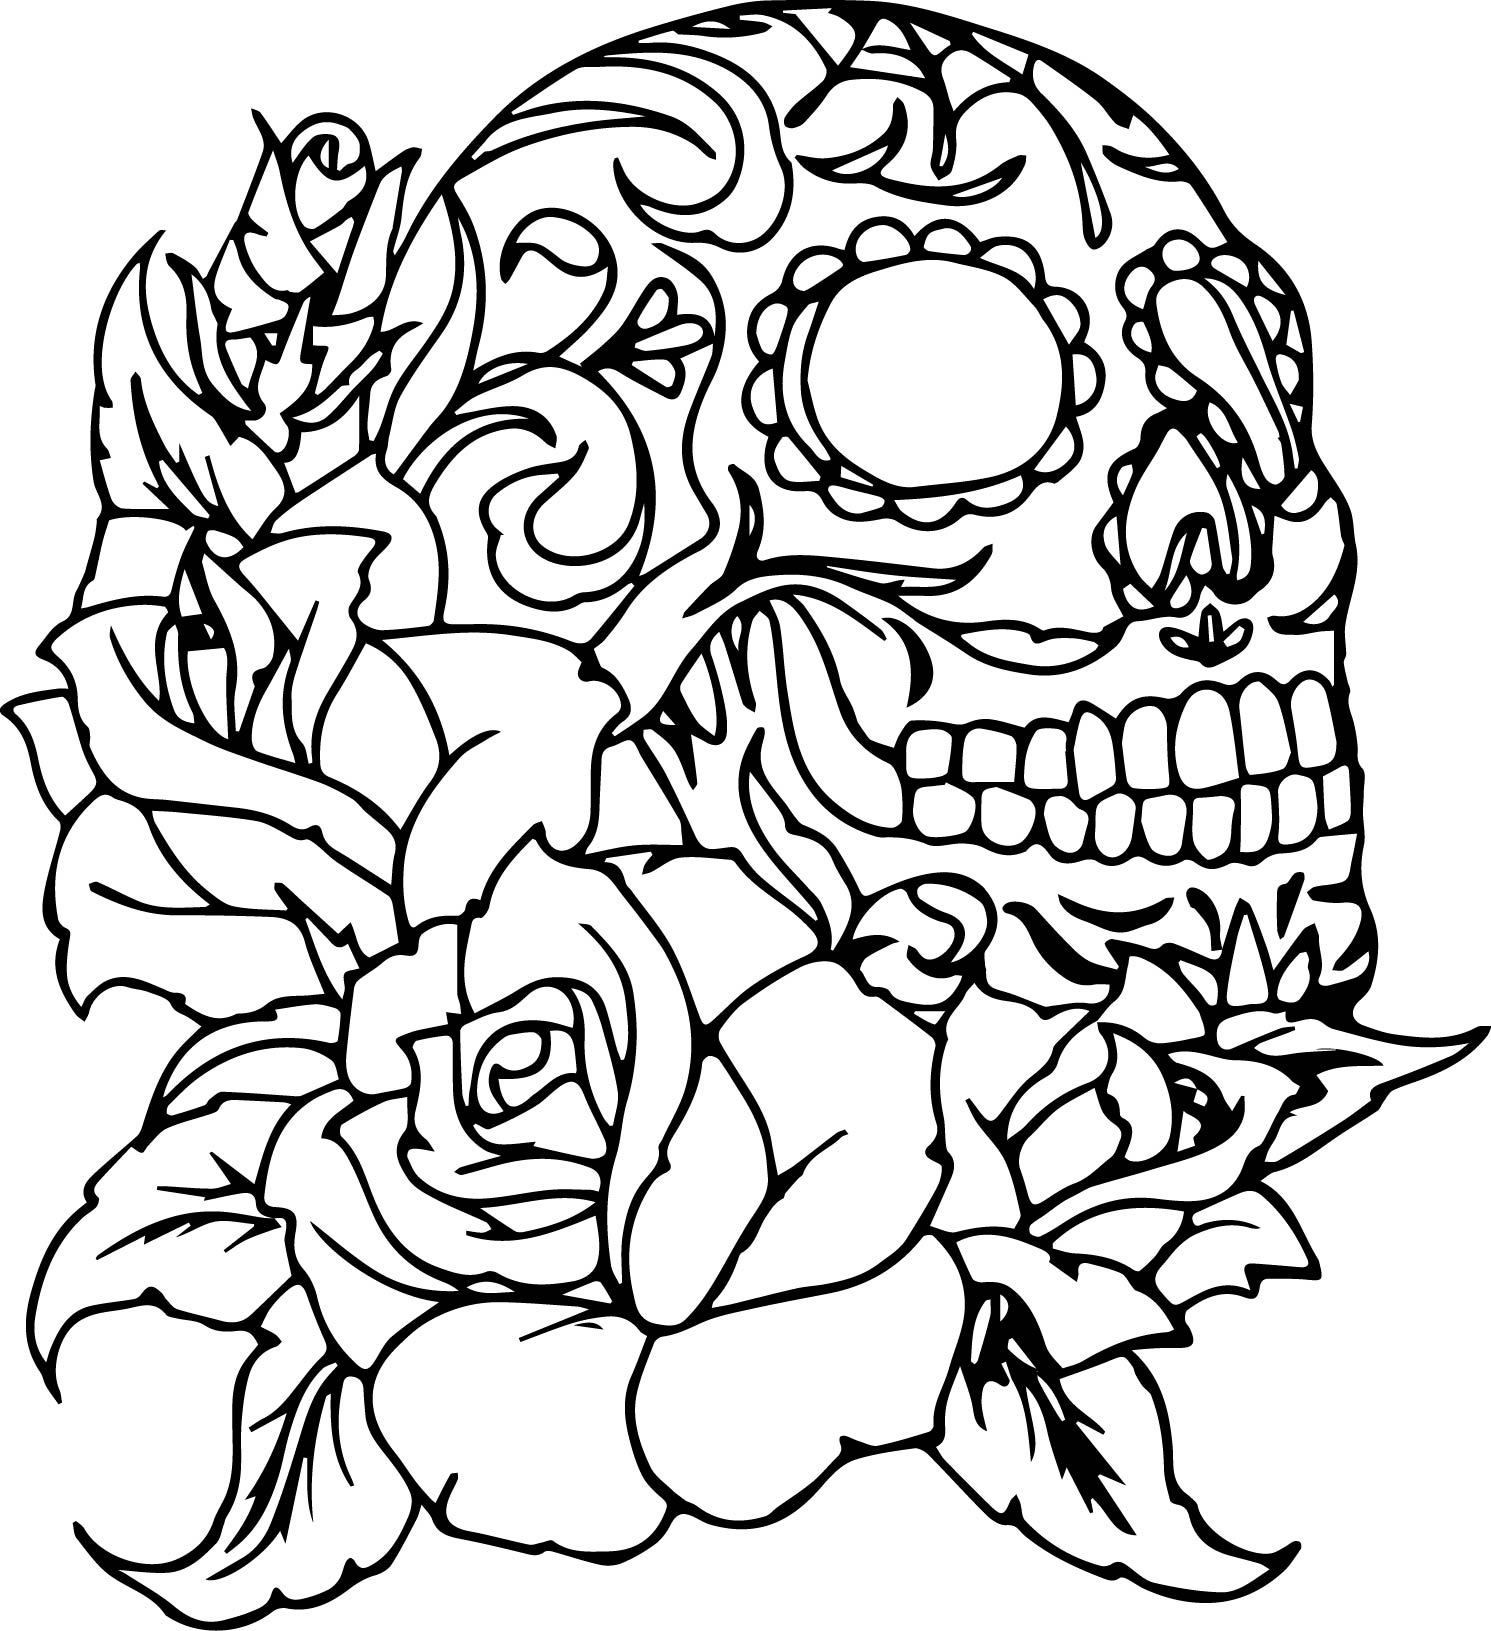 skull-and-roses-coloring-pages-at-getdrawings-free-download